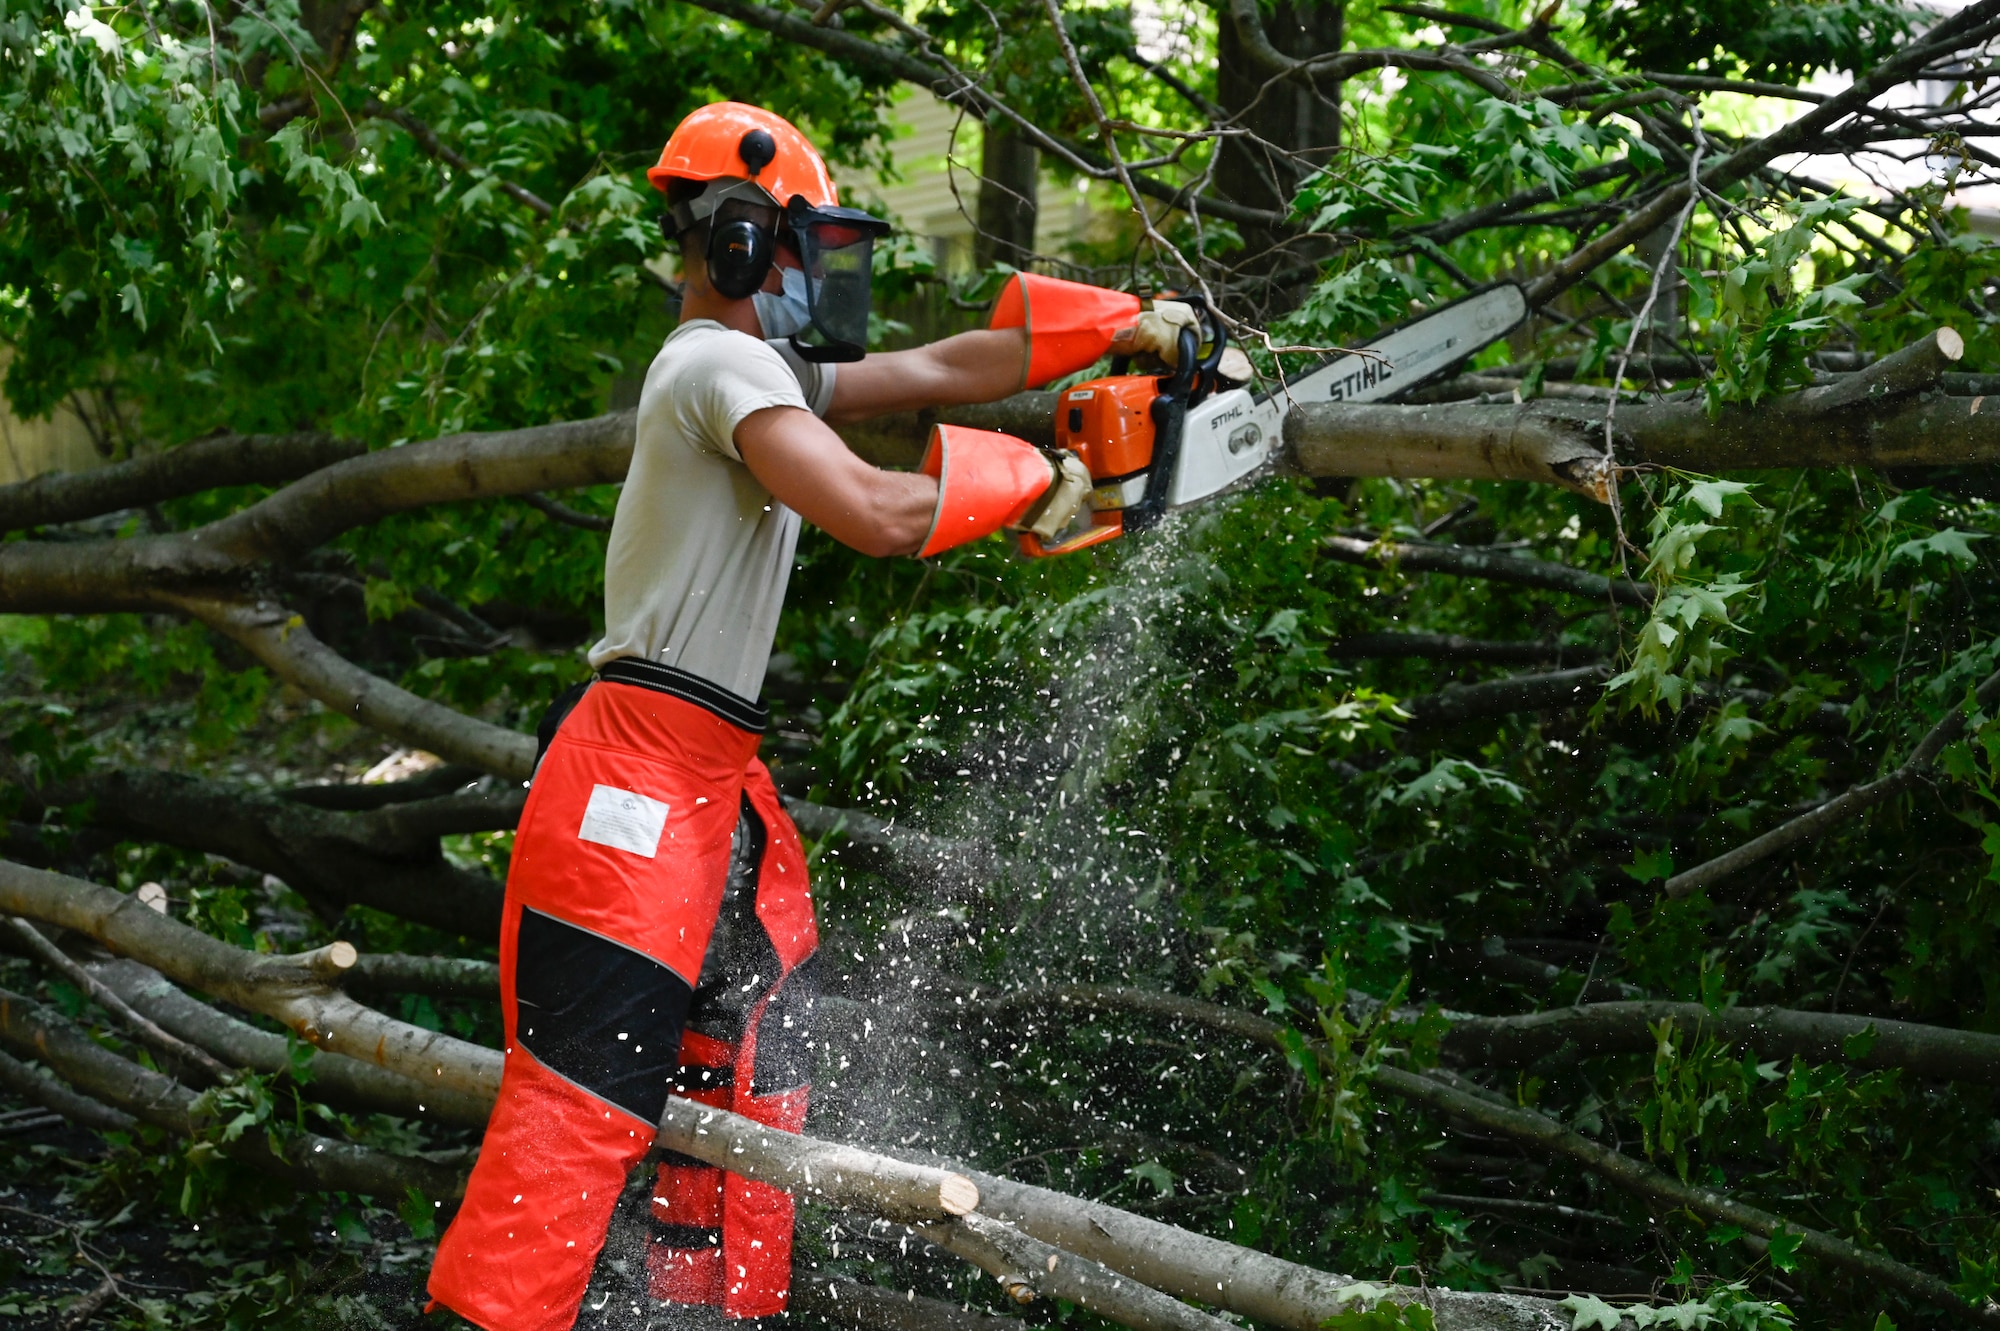 Senior Airman John Donnelly, III, member of the 103rd Civil Engineer Squadron, uses a chainsaw to cut a tree that had fallen into a roadway during Hurricane Isaias, August 8, 2020, Fairfield, Connecticut. The 103rd CES was one of multiple Connecticut Guard units to provide disaster relief in response to Isaias. (U.S. Air National Guard photo by Tech. Sgt. Tamara Dabney)